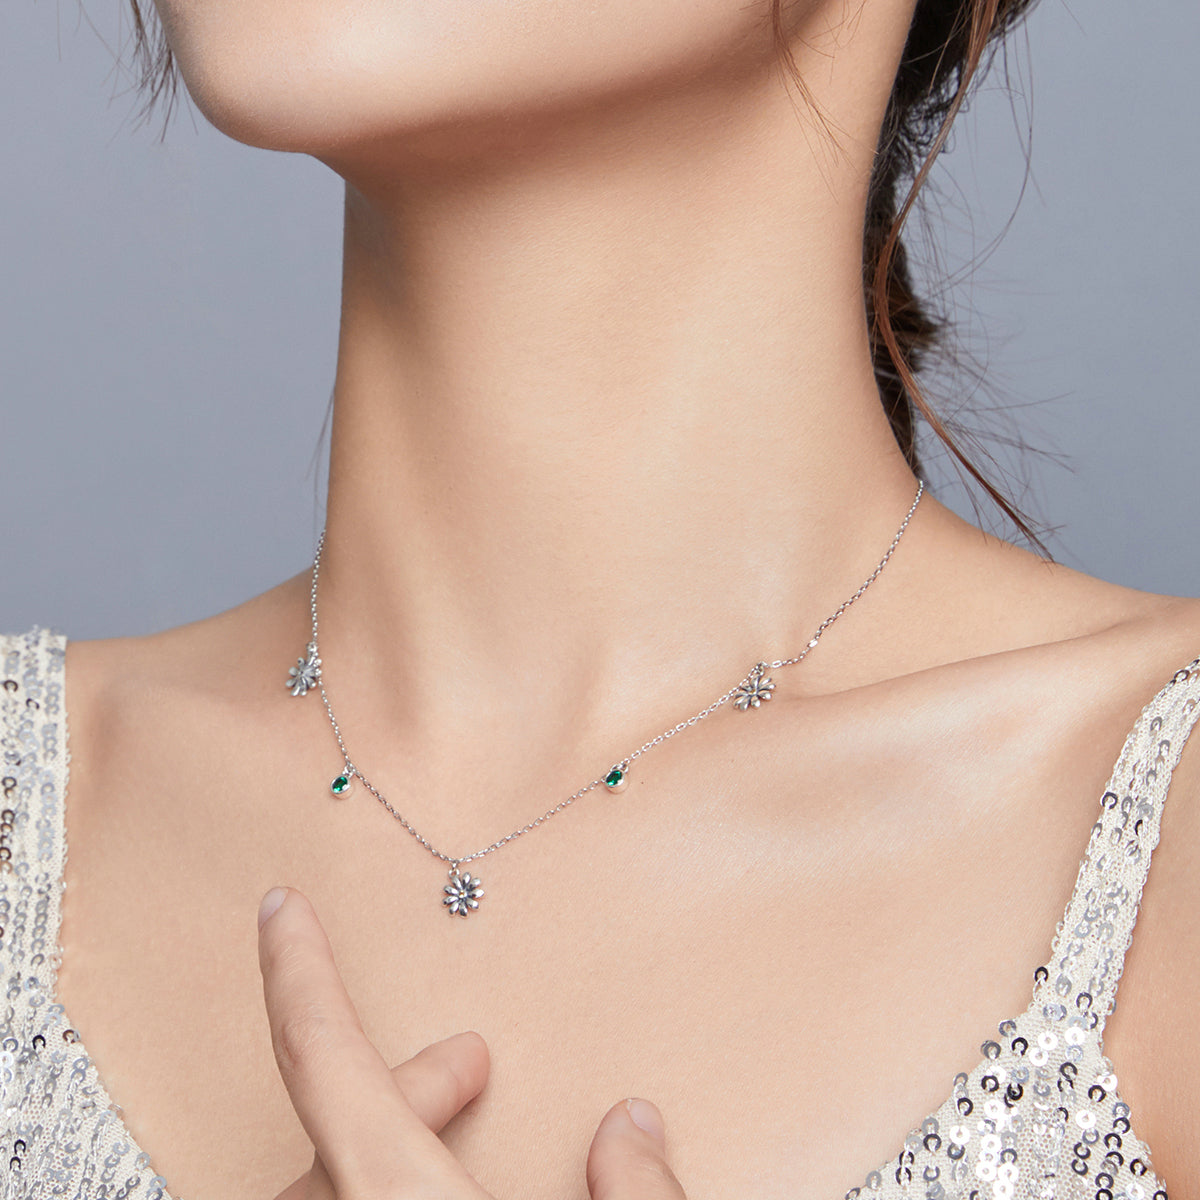 Flora Green Stone Necklace In Sterling Silver| Platinum - Bonjeur Precious                                                                                                                